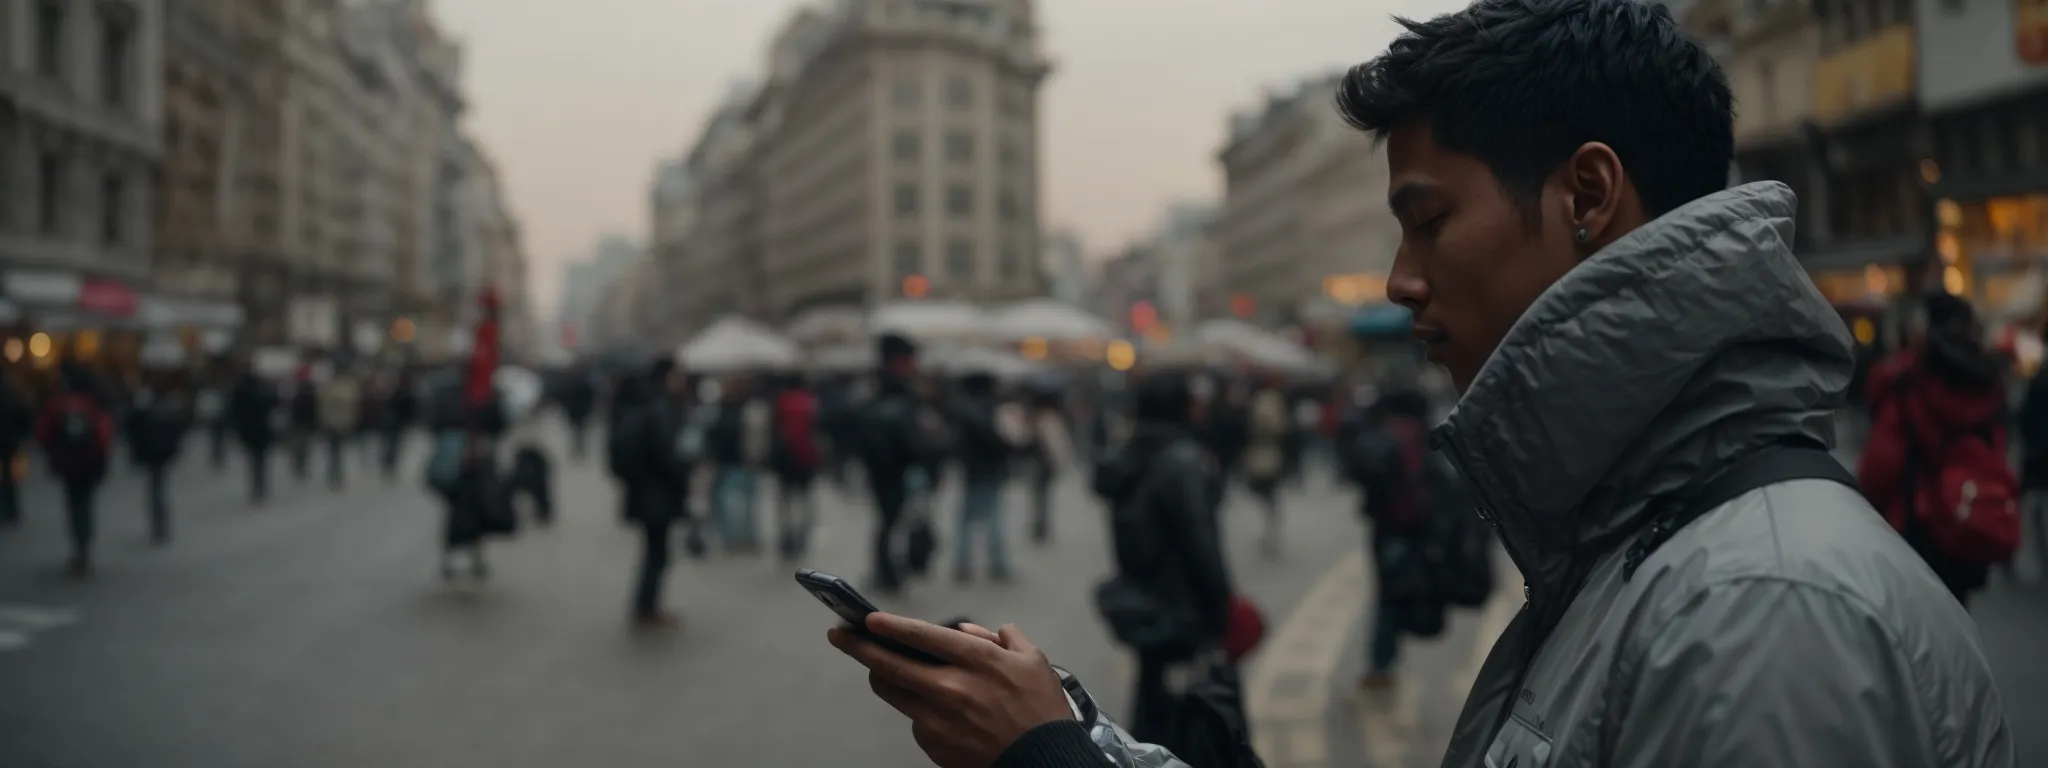 a person typing a message on a smartphone in a busy city street.